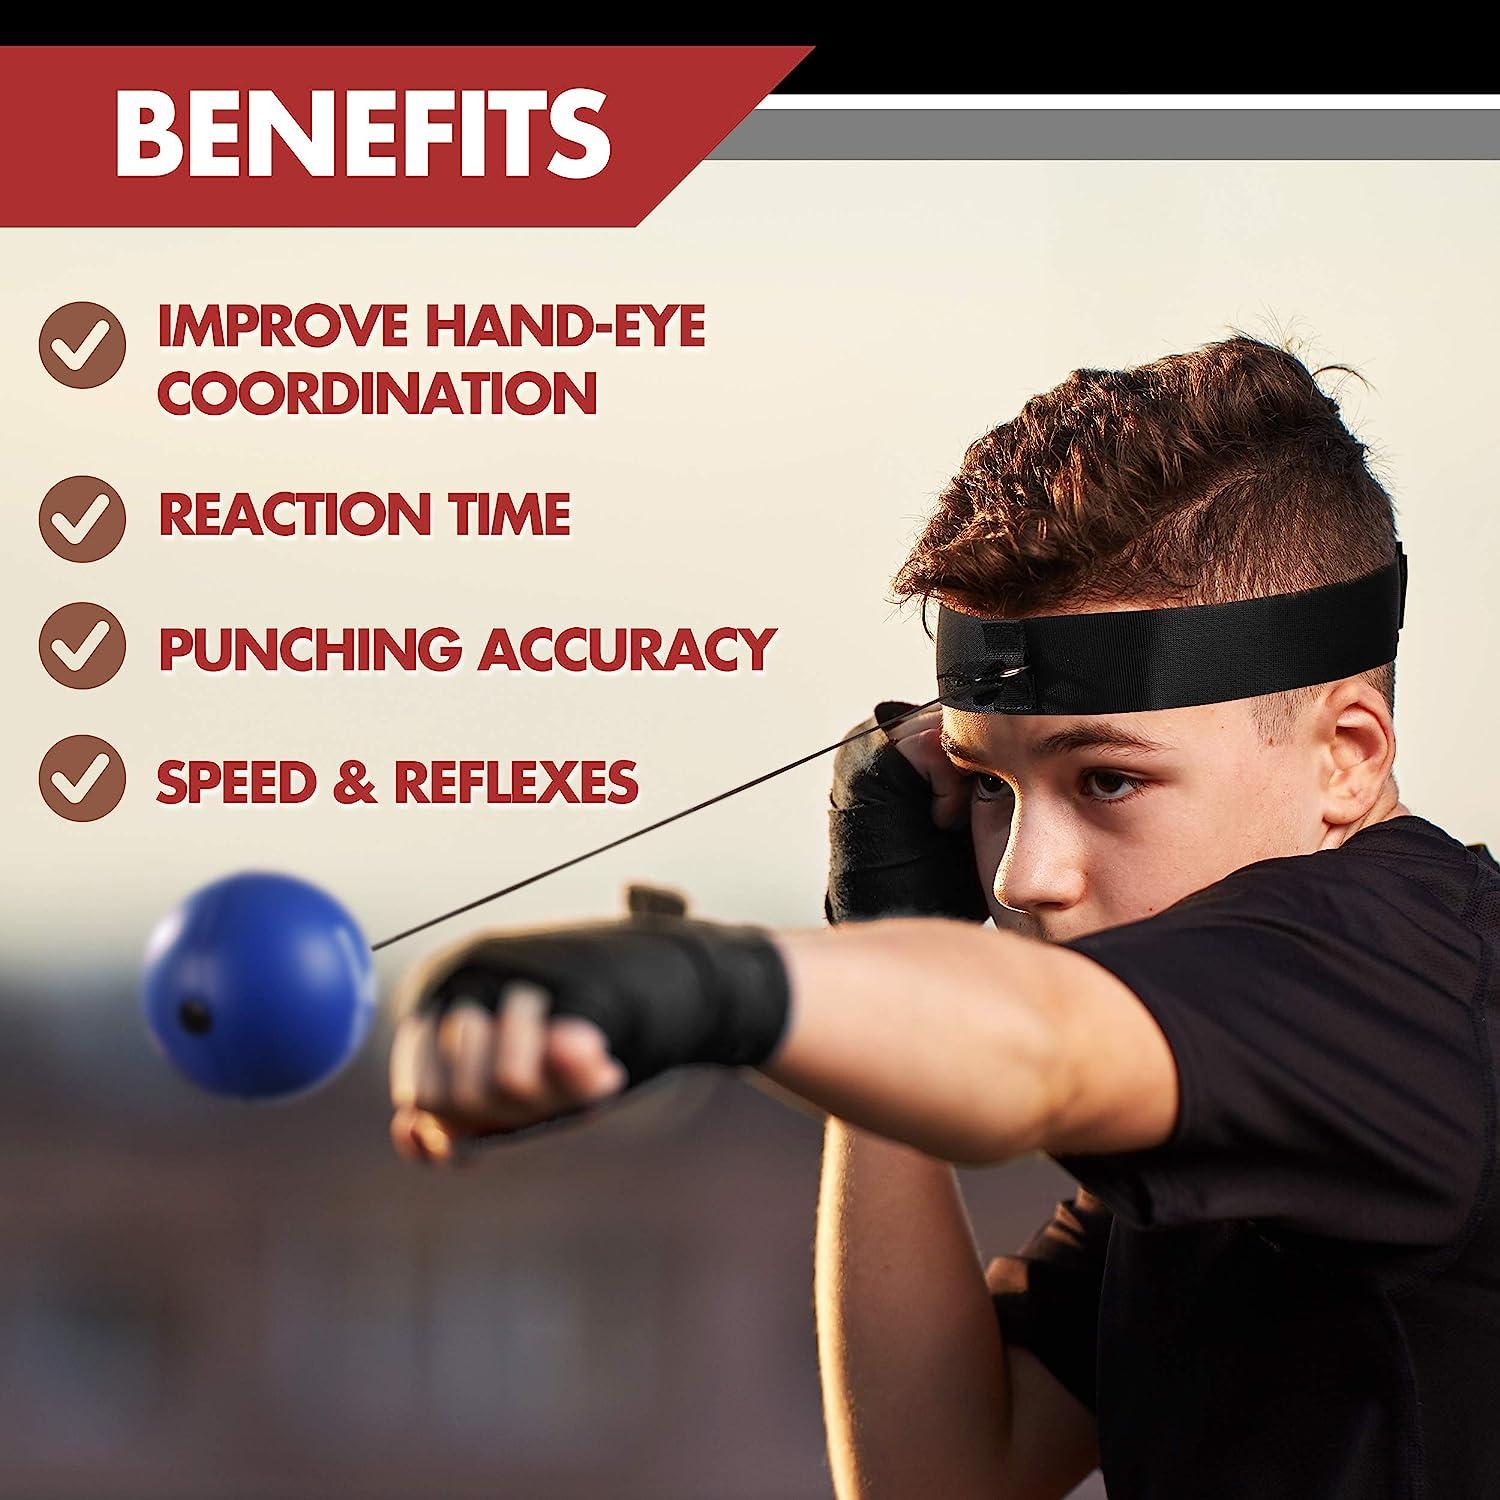 Reflex Sports - Do you have a 5-8 year old who could use some